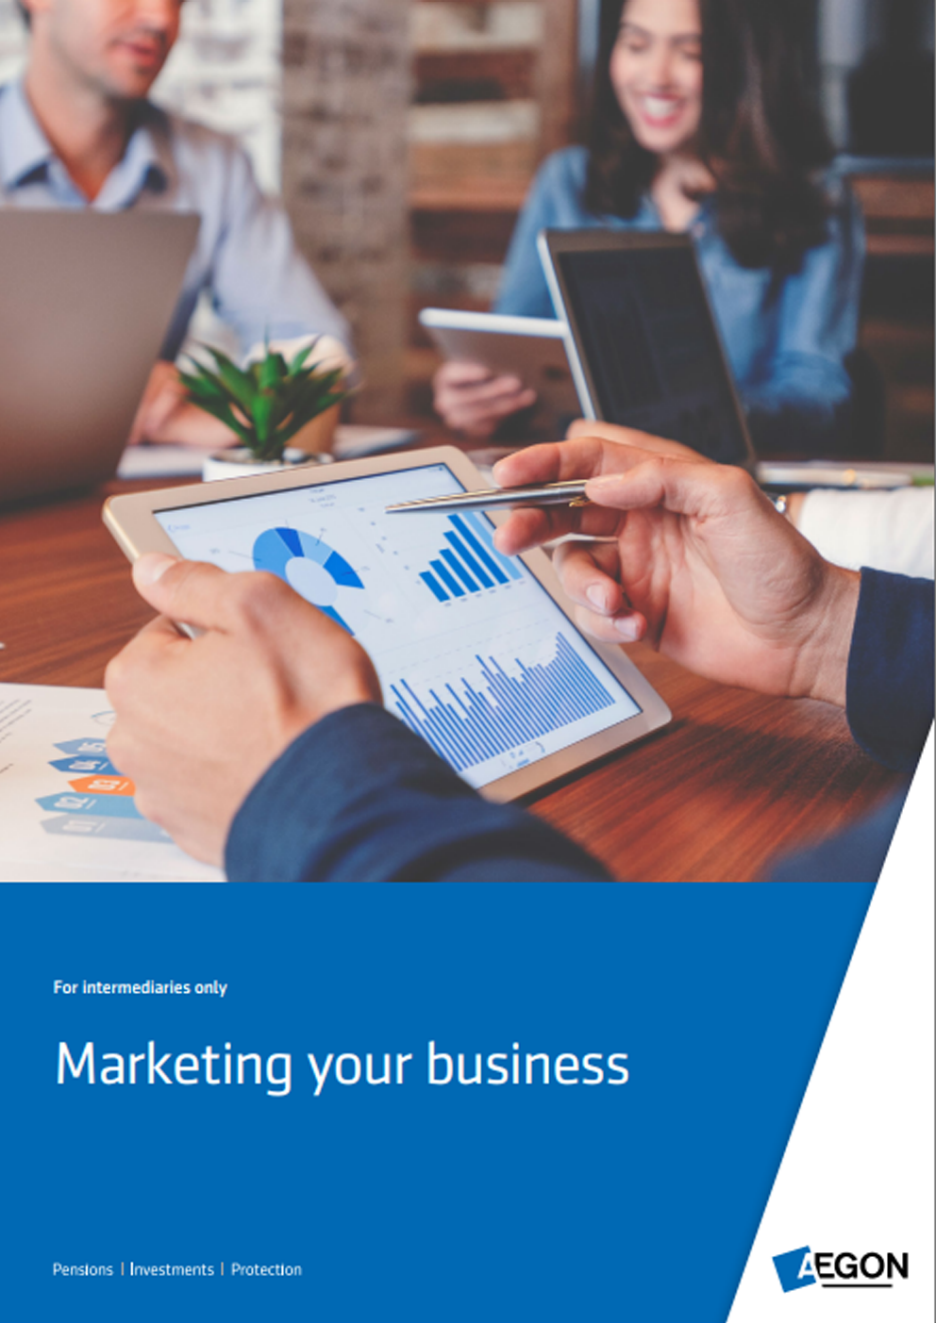 Thumbnail of the Marketing your business guide.